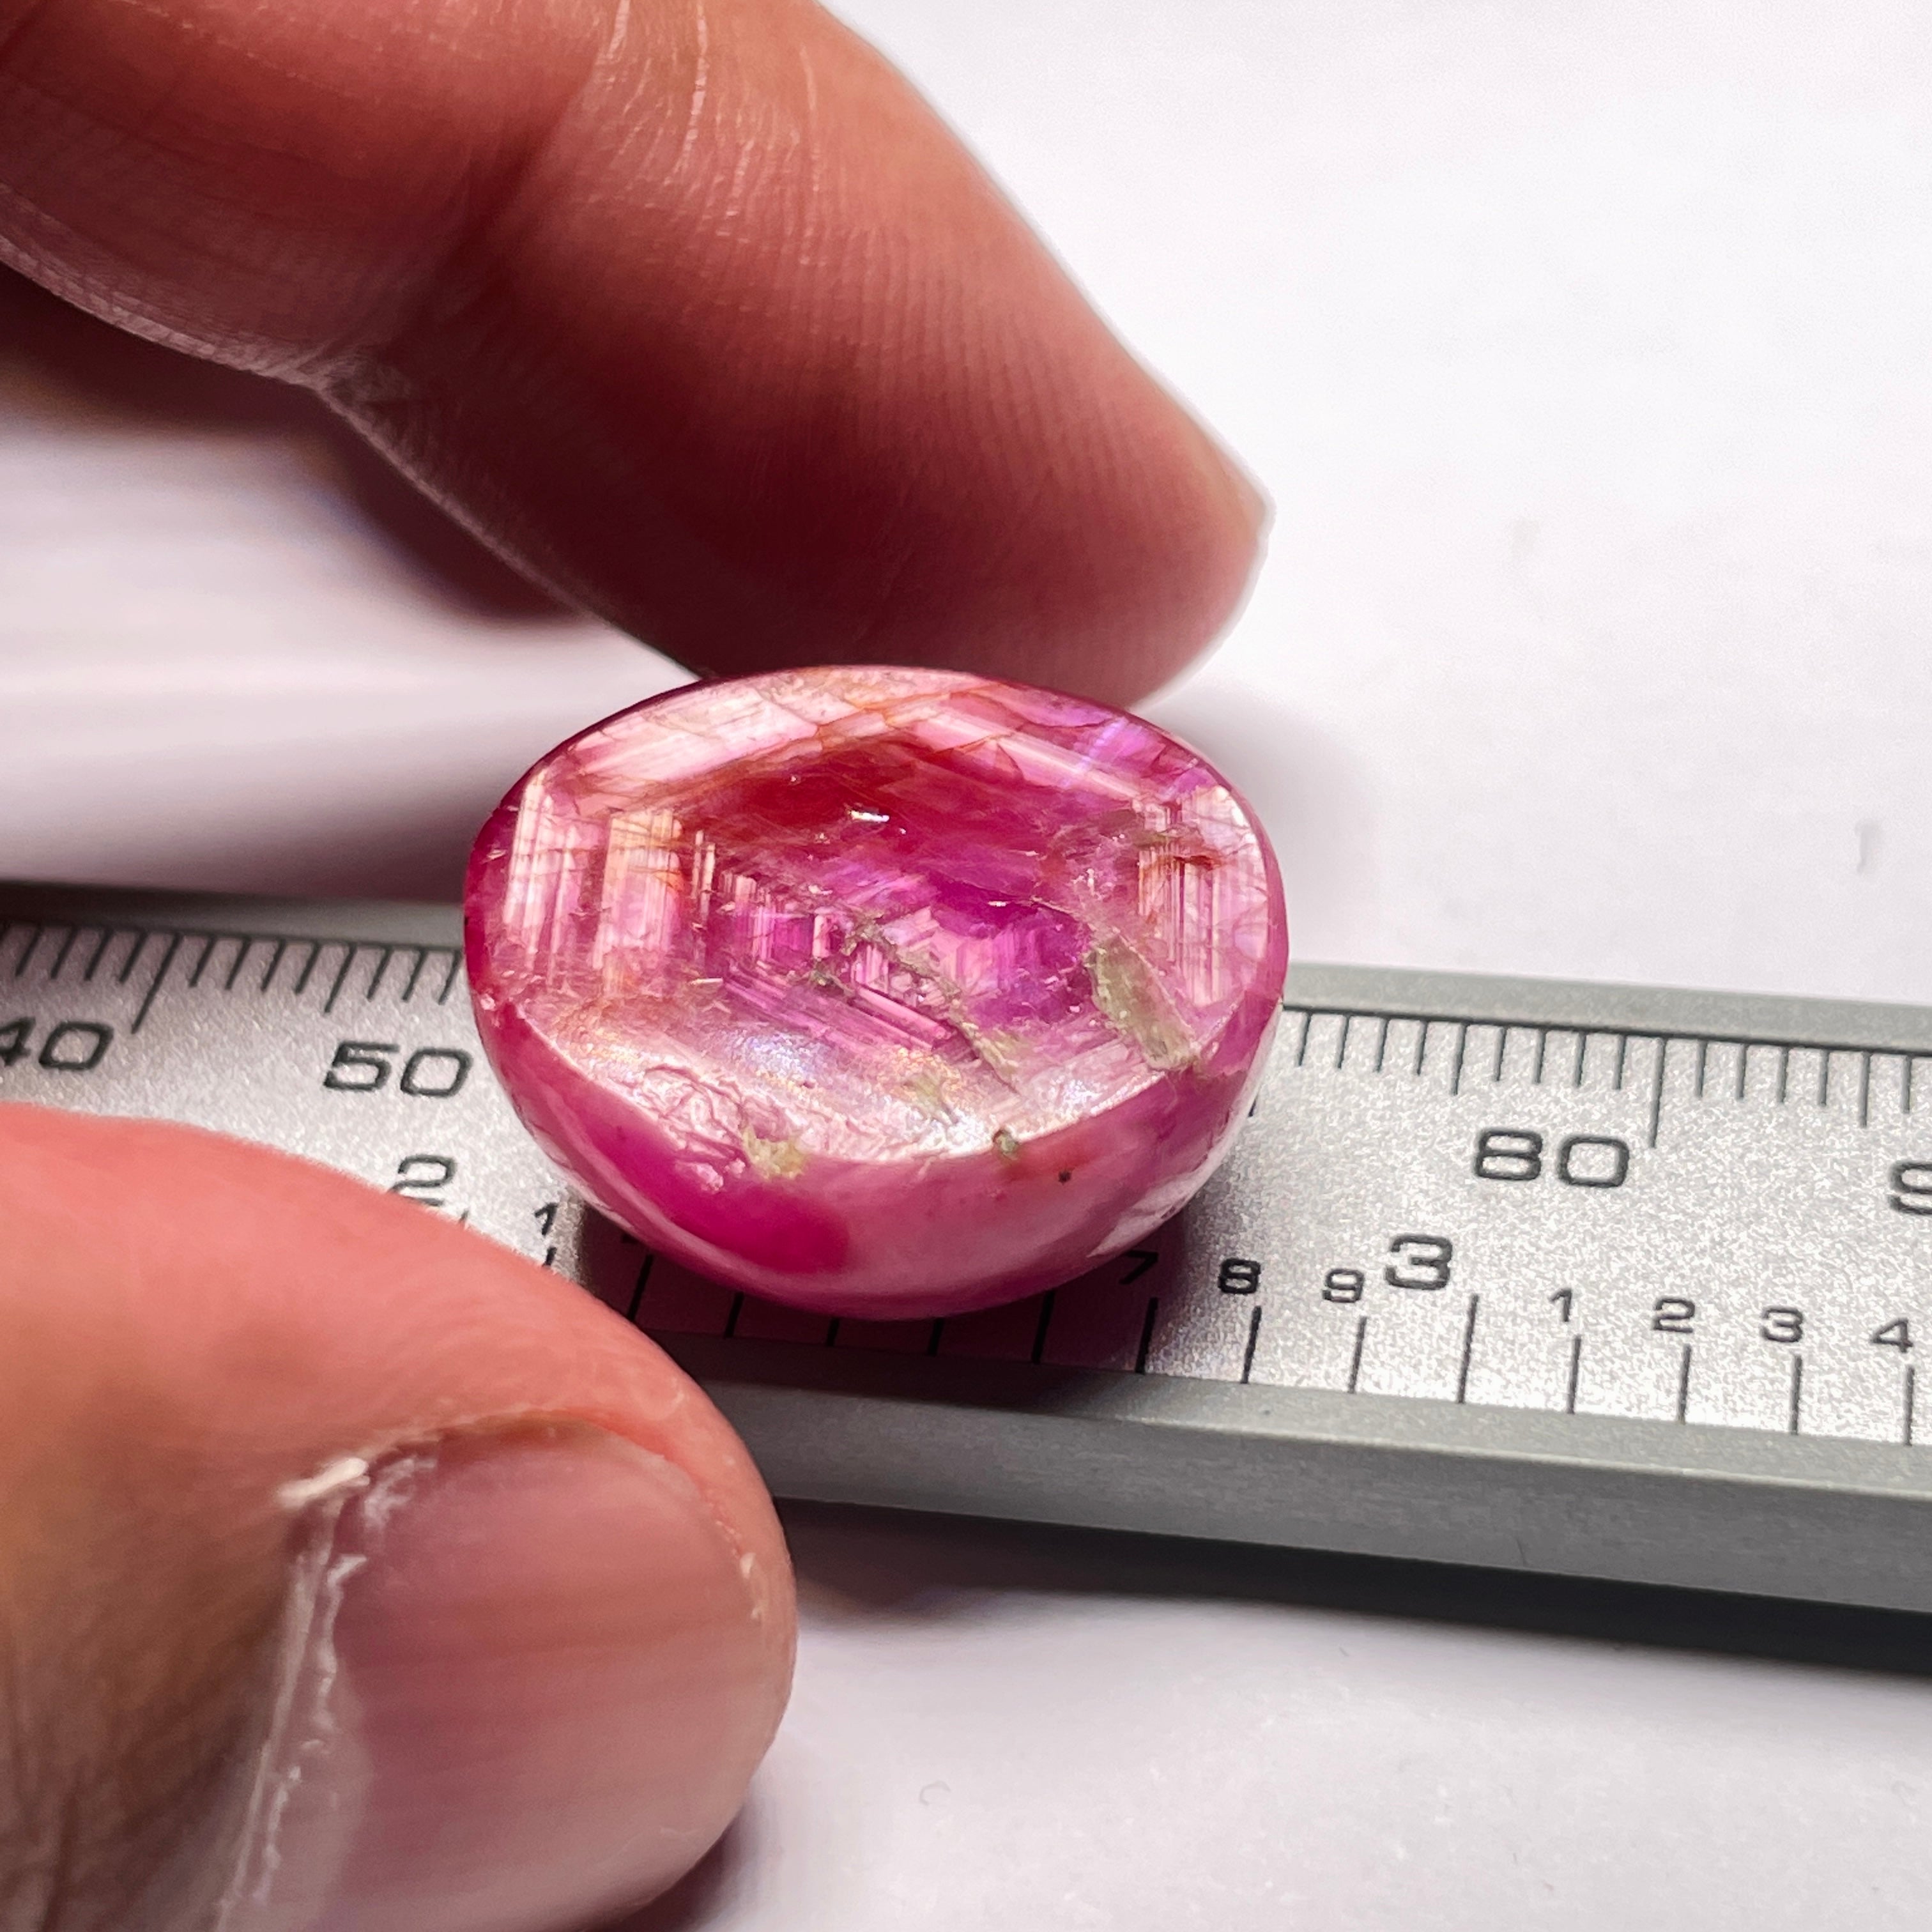 38.86Ct Ruby Untreated Unheated From A Special Location In Kenya Called Lake Turkana. Beautiful